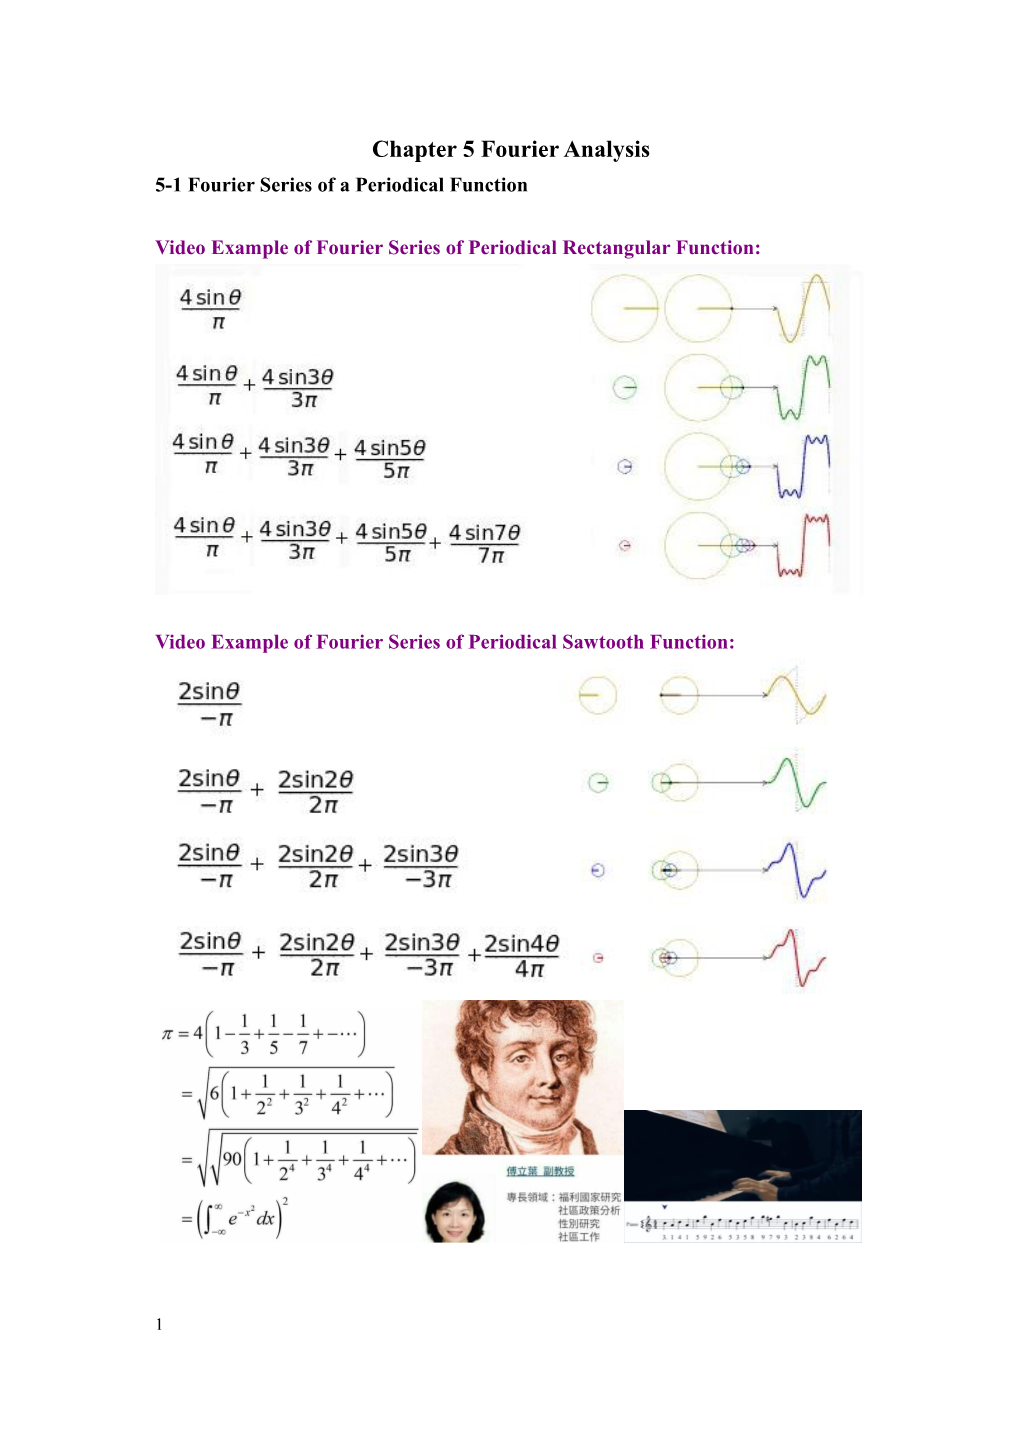 5-1 Fourier Series of a Periodical Function